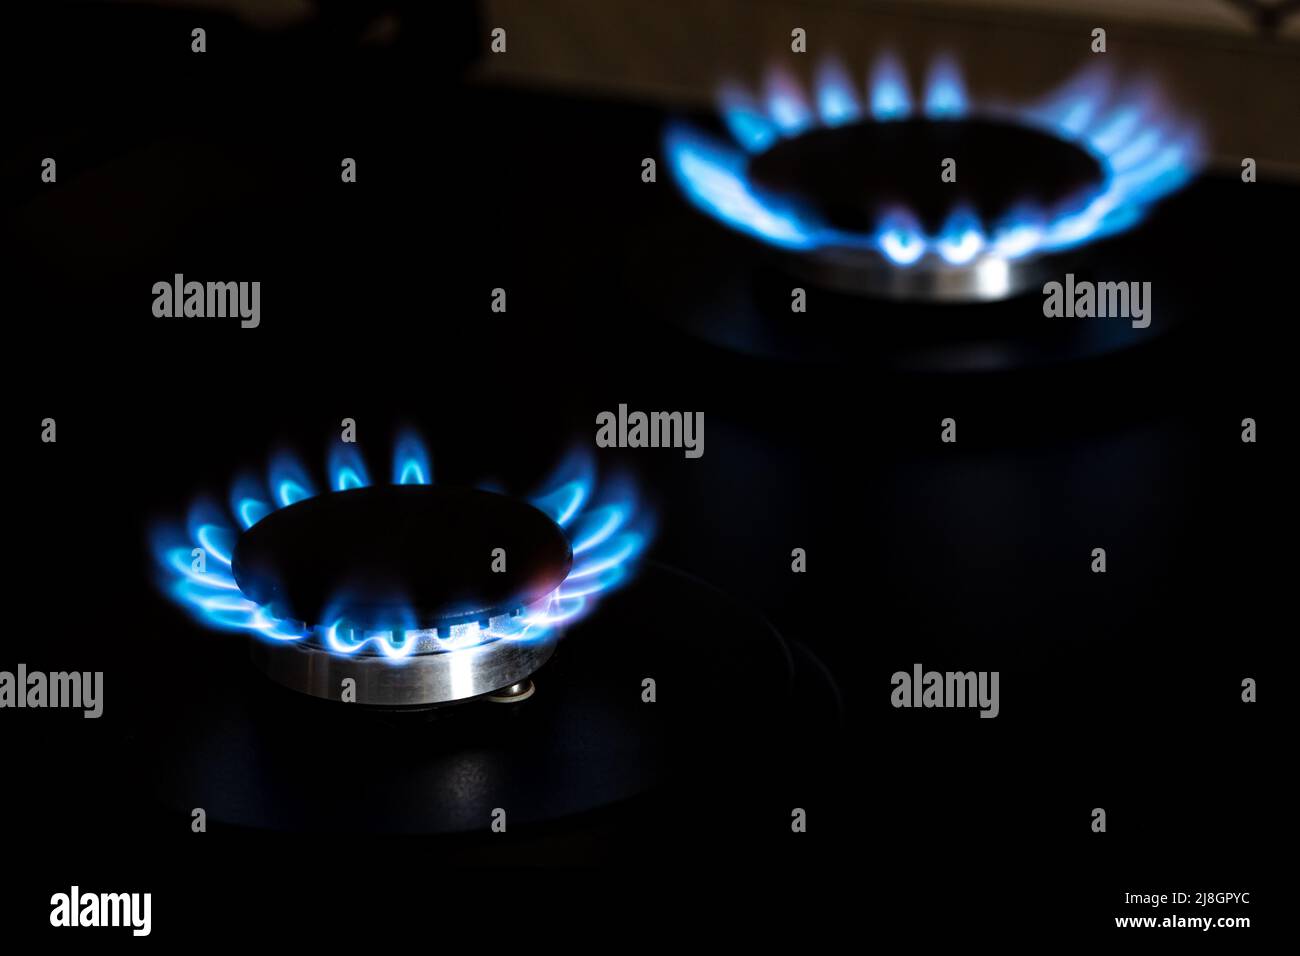 https://c8.alamy.com/comp/2J8GPYC/closeup-shot-of-blue-fire-from-domestic-kitchen-stove-top-burning-gas-gas-stove-burner-gas-cooker-with-burning-flames-of-propane-gas-industrial-re-2J8GPYC.jpg